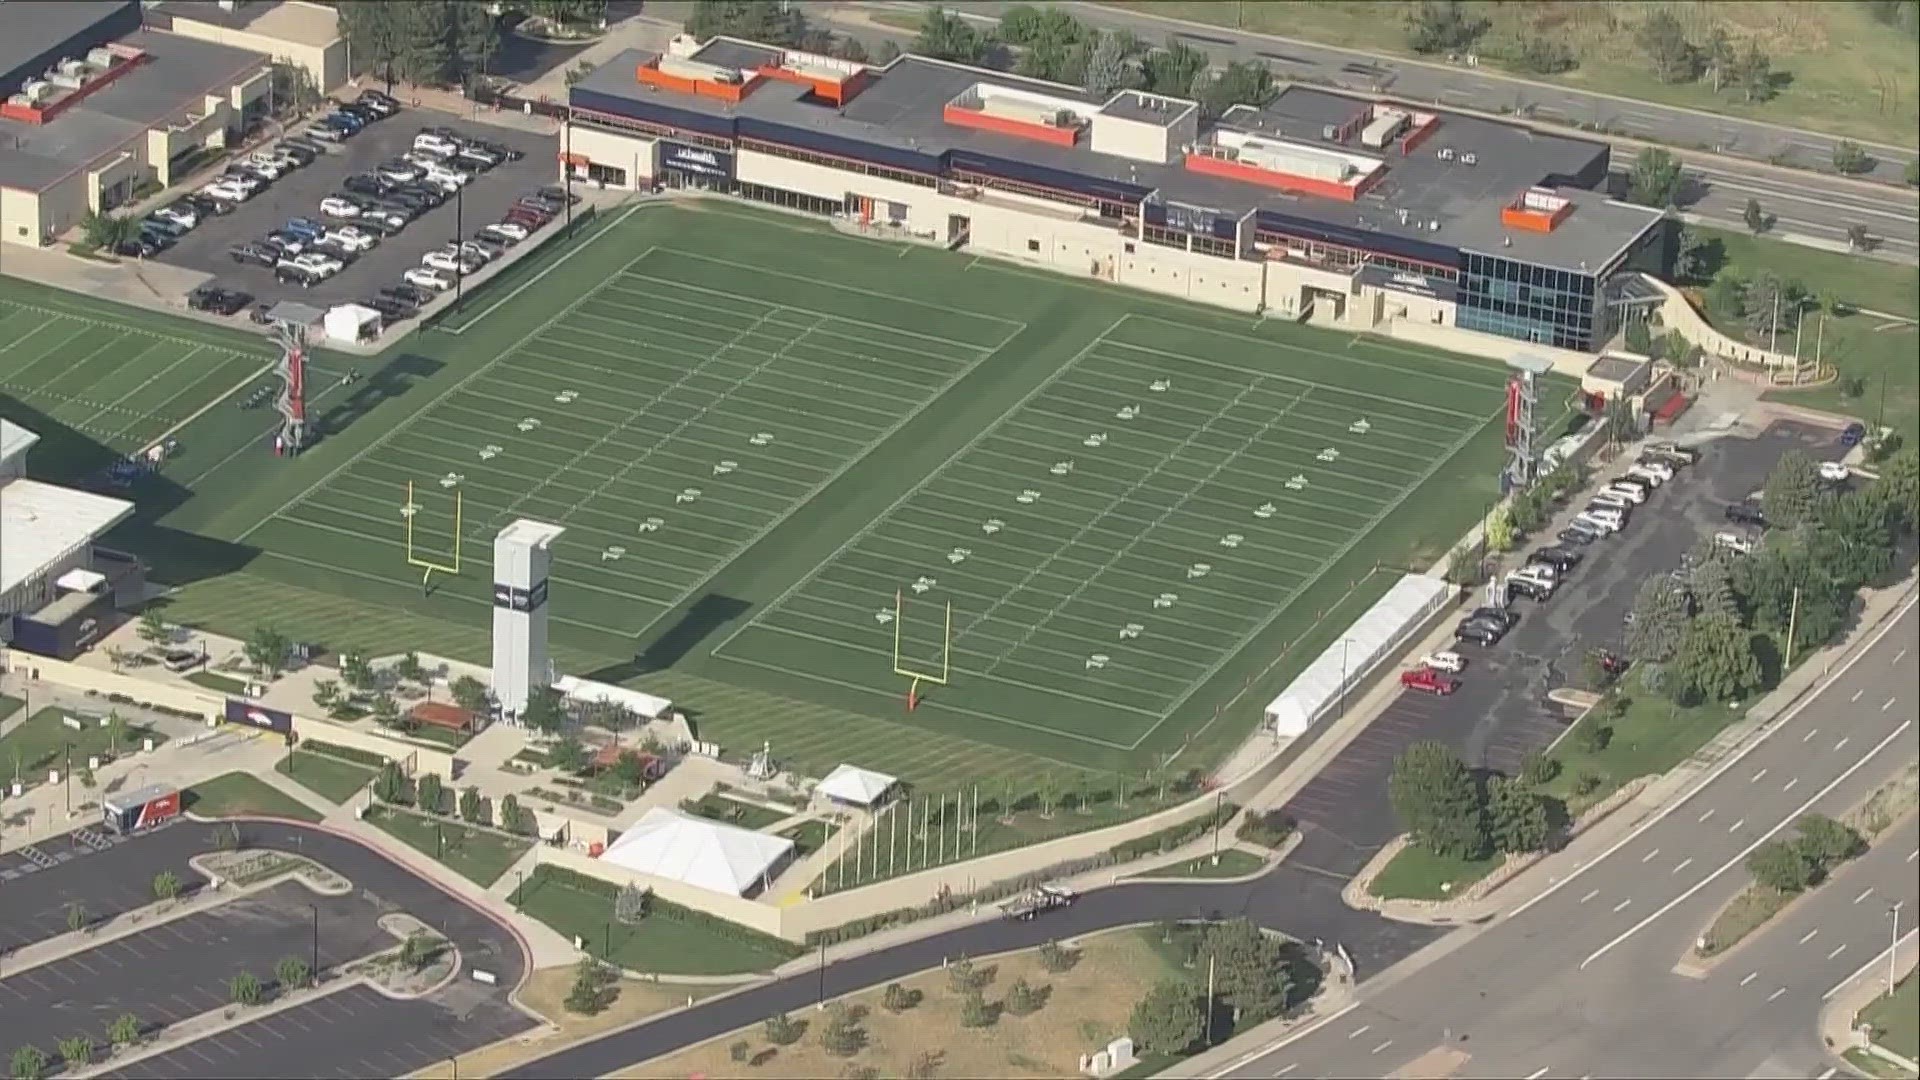 The Denver Broncos have struck a 10-year deal with Centura Health to become the naming rights holder of their training facility and official healthcare provider.